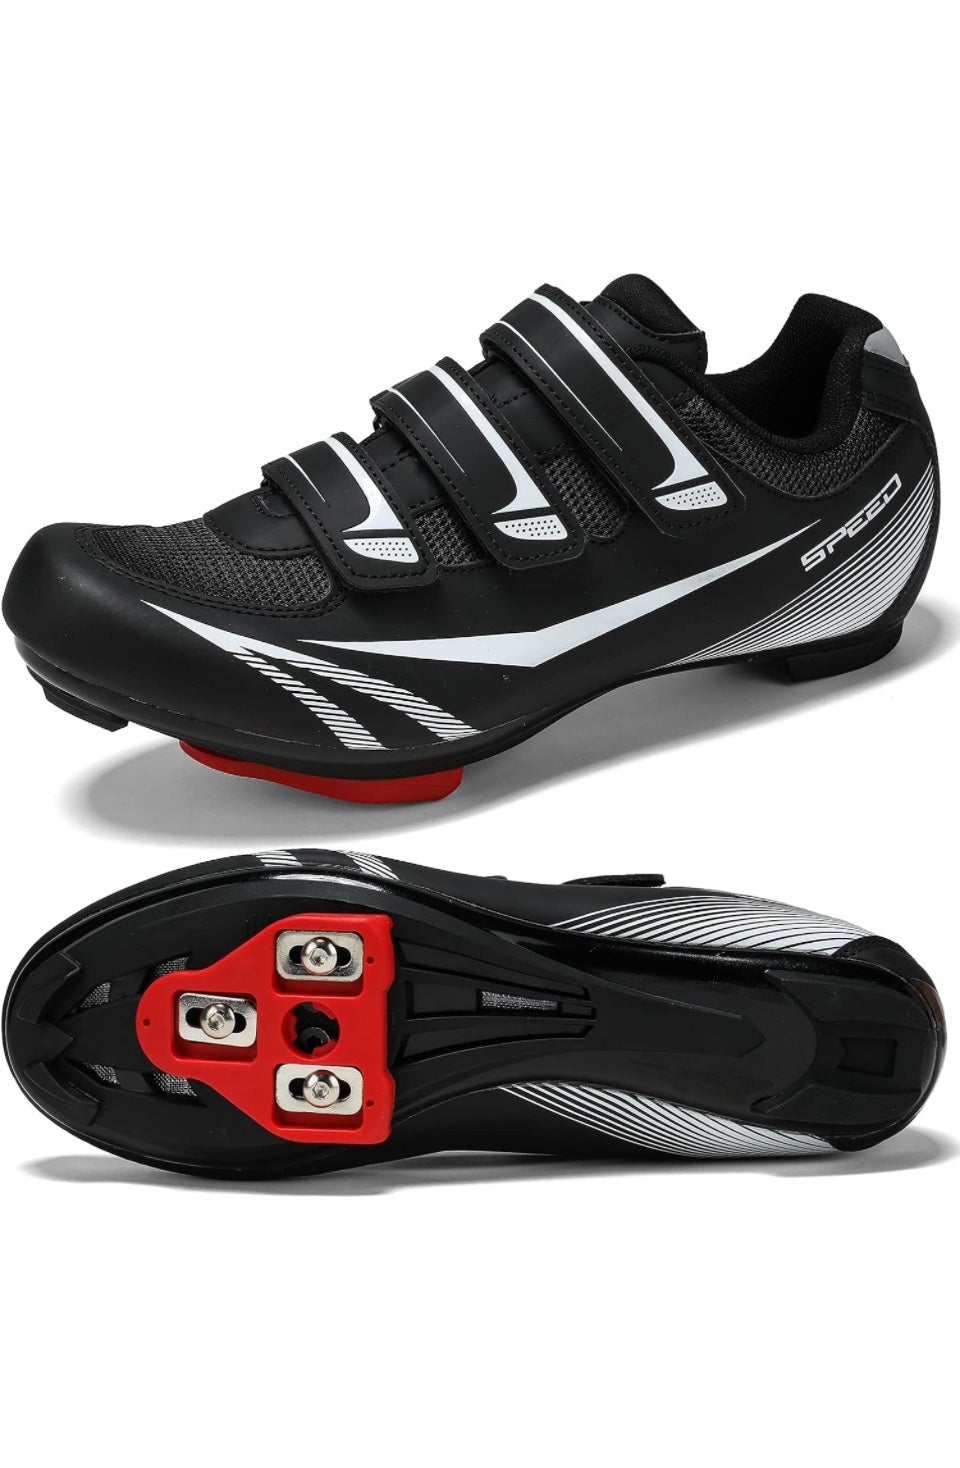 New Louis Garneau - Actifly Indoor Cycling Shoes (Collab with Reebok) -  Size: W 10 (M 9.0)